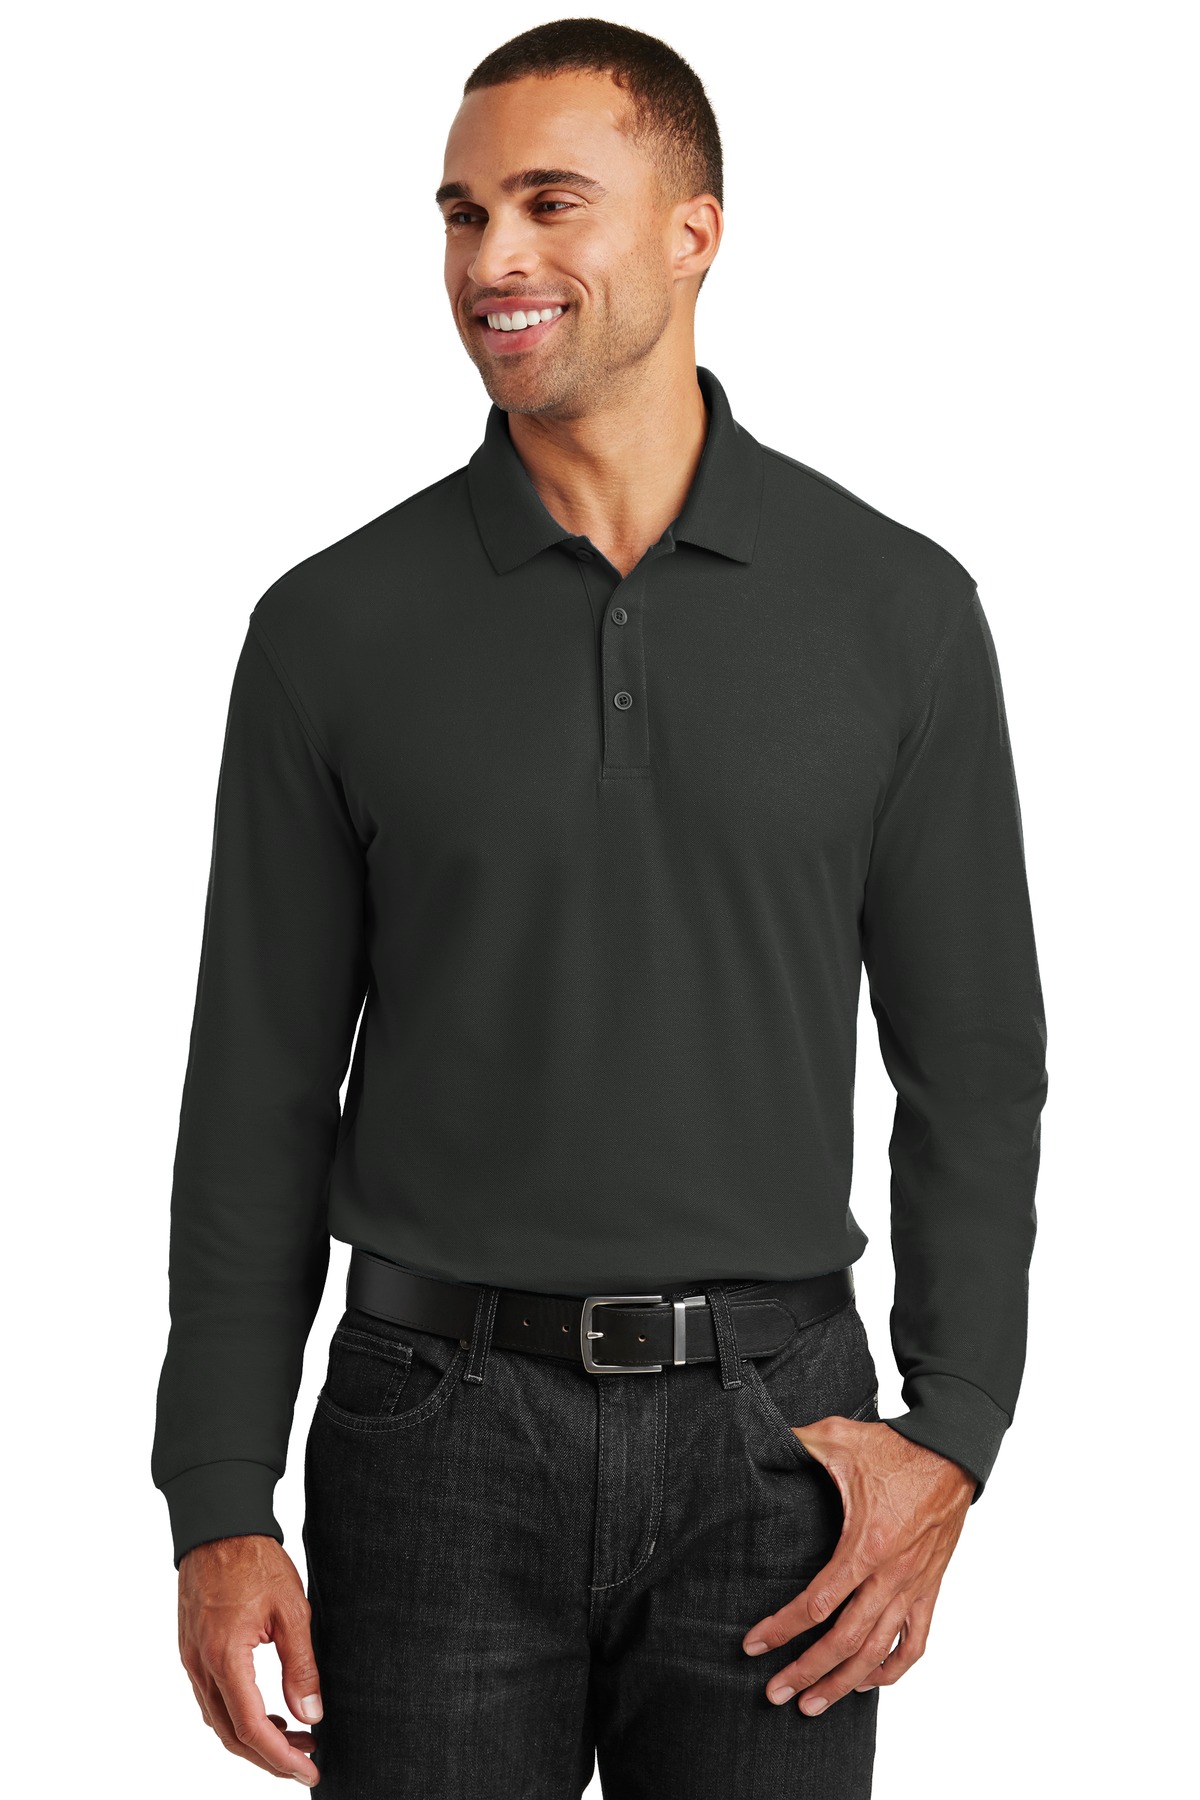 Port Authority Hospitality Polos & Knits ® Long Sleeve Core Classic Pique Polo.-Port Authority